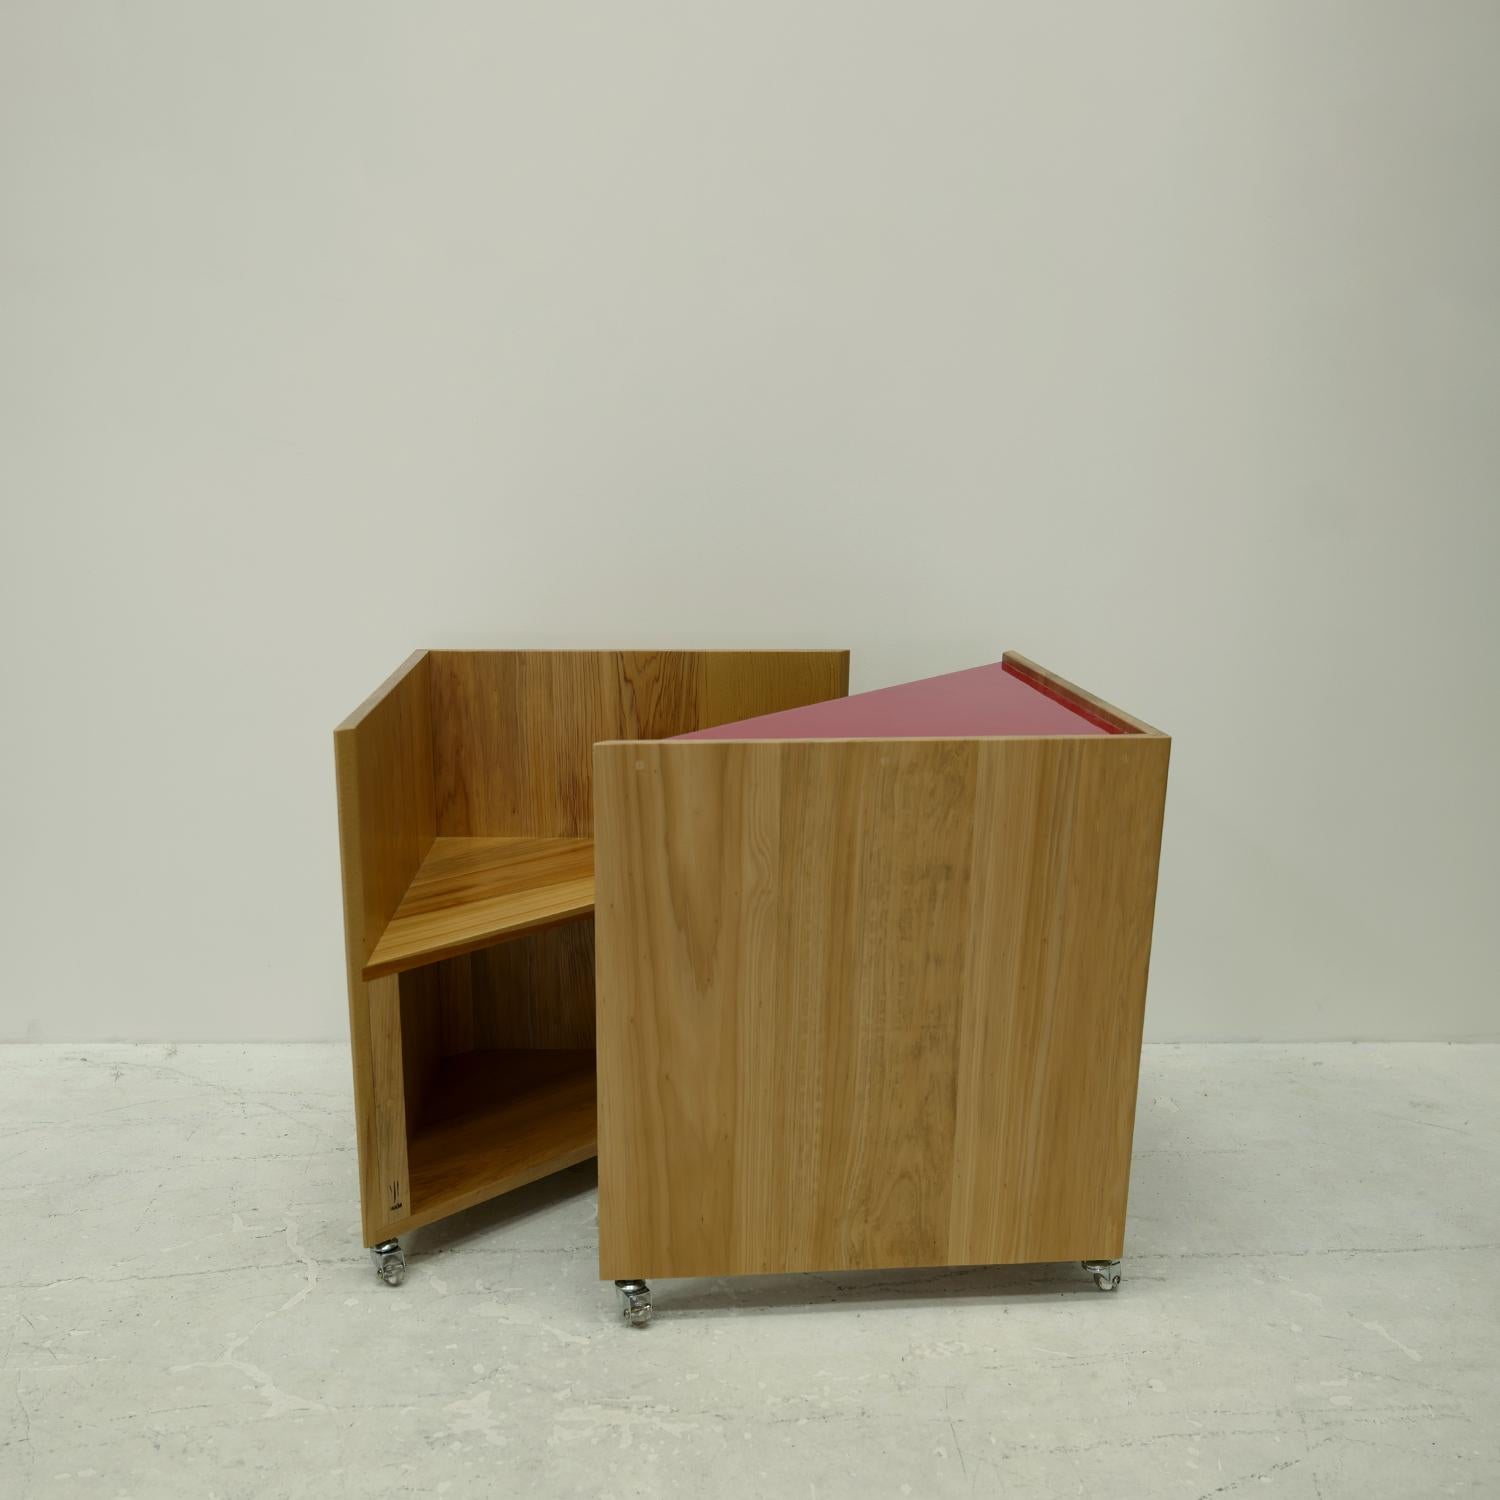 Design：Lina Bo Bardi, Marcelo Ferraz, André Vainer
Material：Solid Pine, Melamine laminate, with casters

Designed by Lina Bo Baldi in 1986, this children's desk was created for installation in the SESC Pompeia Cultural Center, a cultural facility in